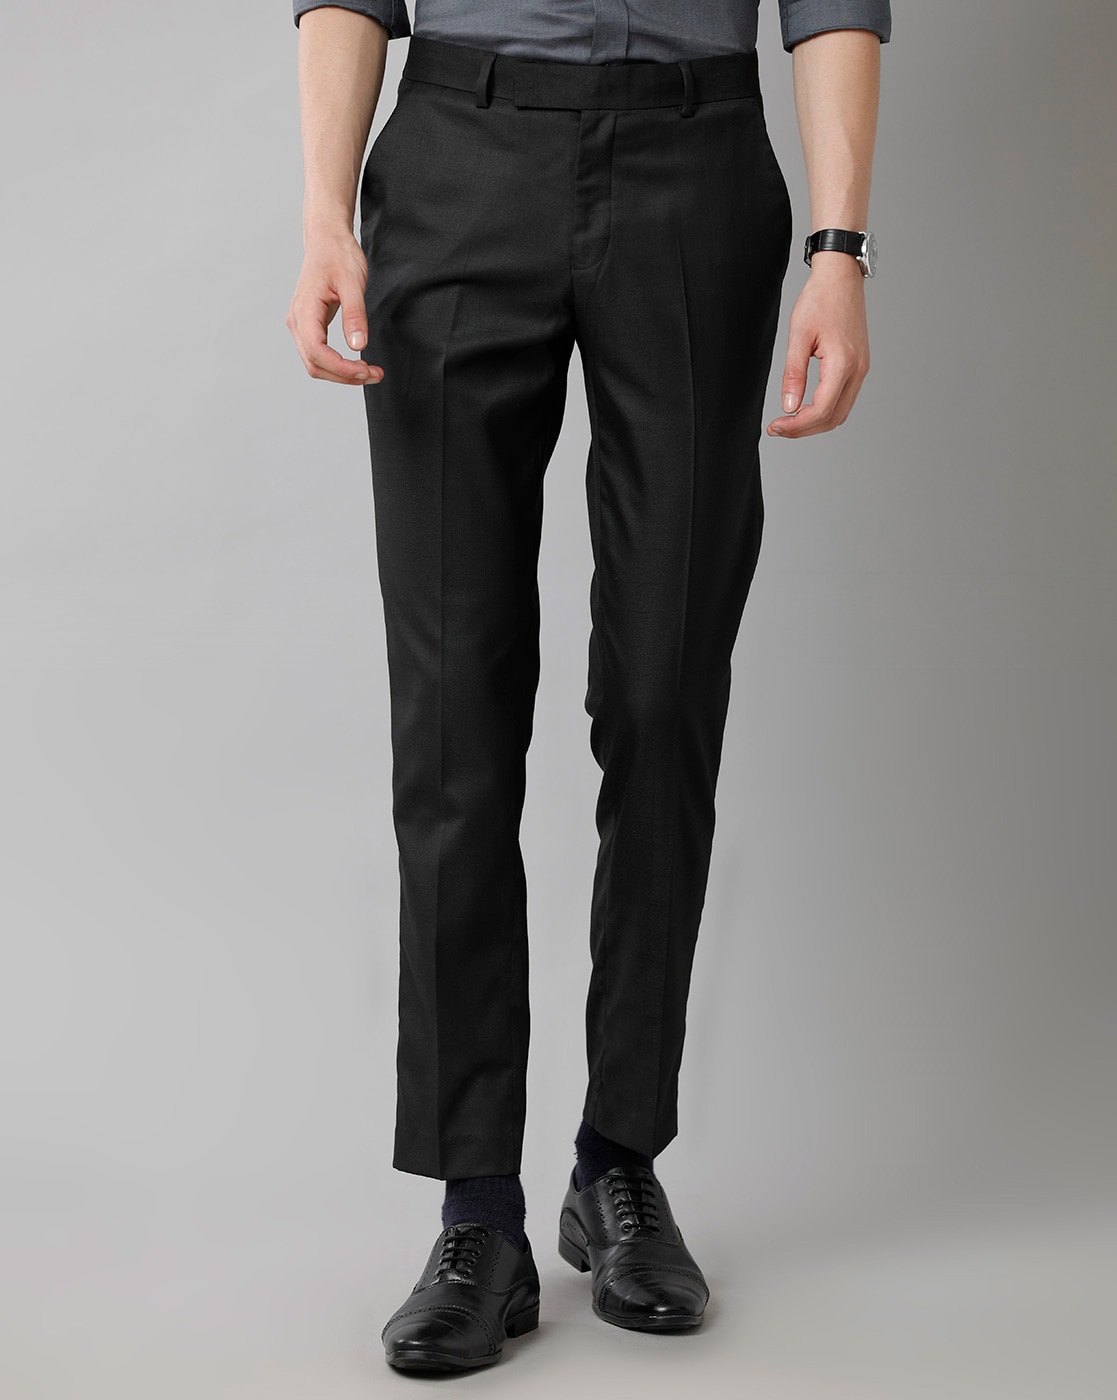 Autumn Slim Fit High Rise Formal Pants For Men British Style Belt Design  For Office, Wedding, And Formal Events LF20230824 From Chancee, $20.47 |  DHgate.Com